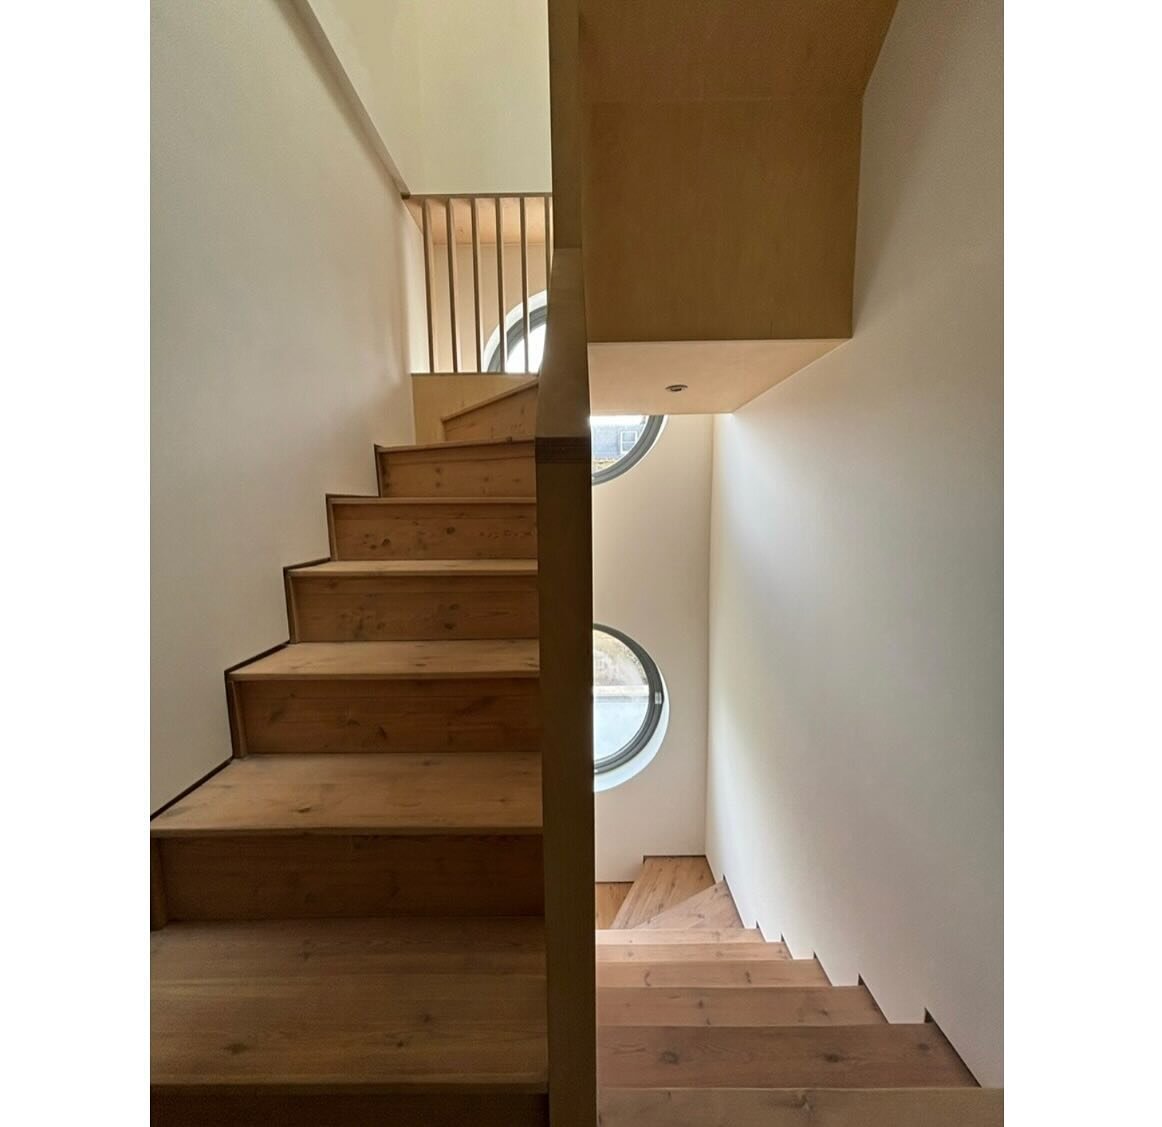 Plywood stair and portholes at our arch house. #modernhome #modernstair